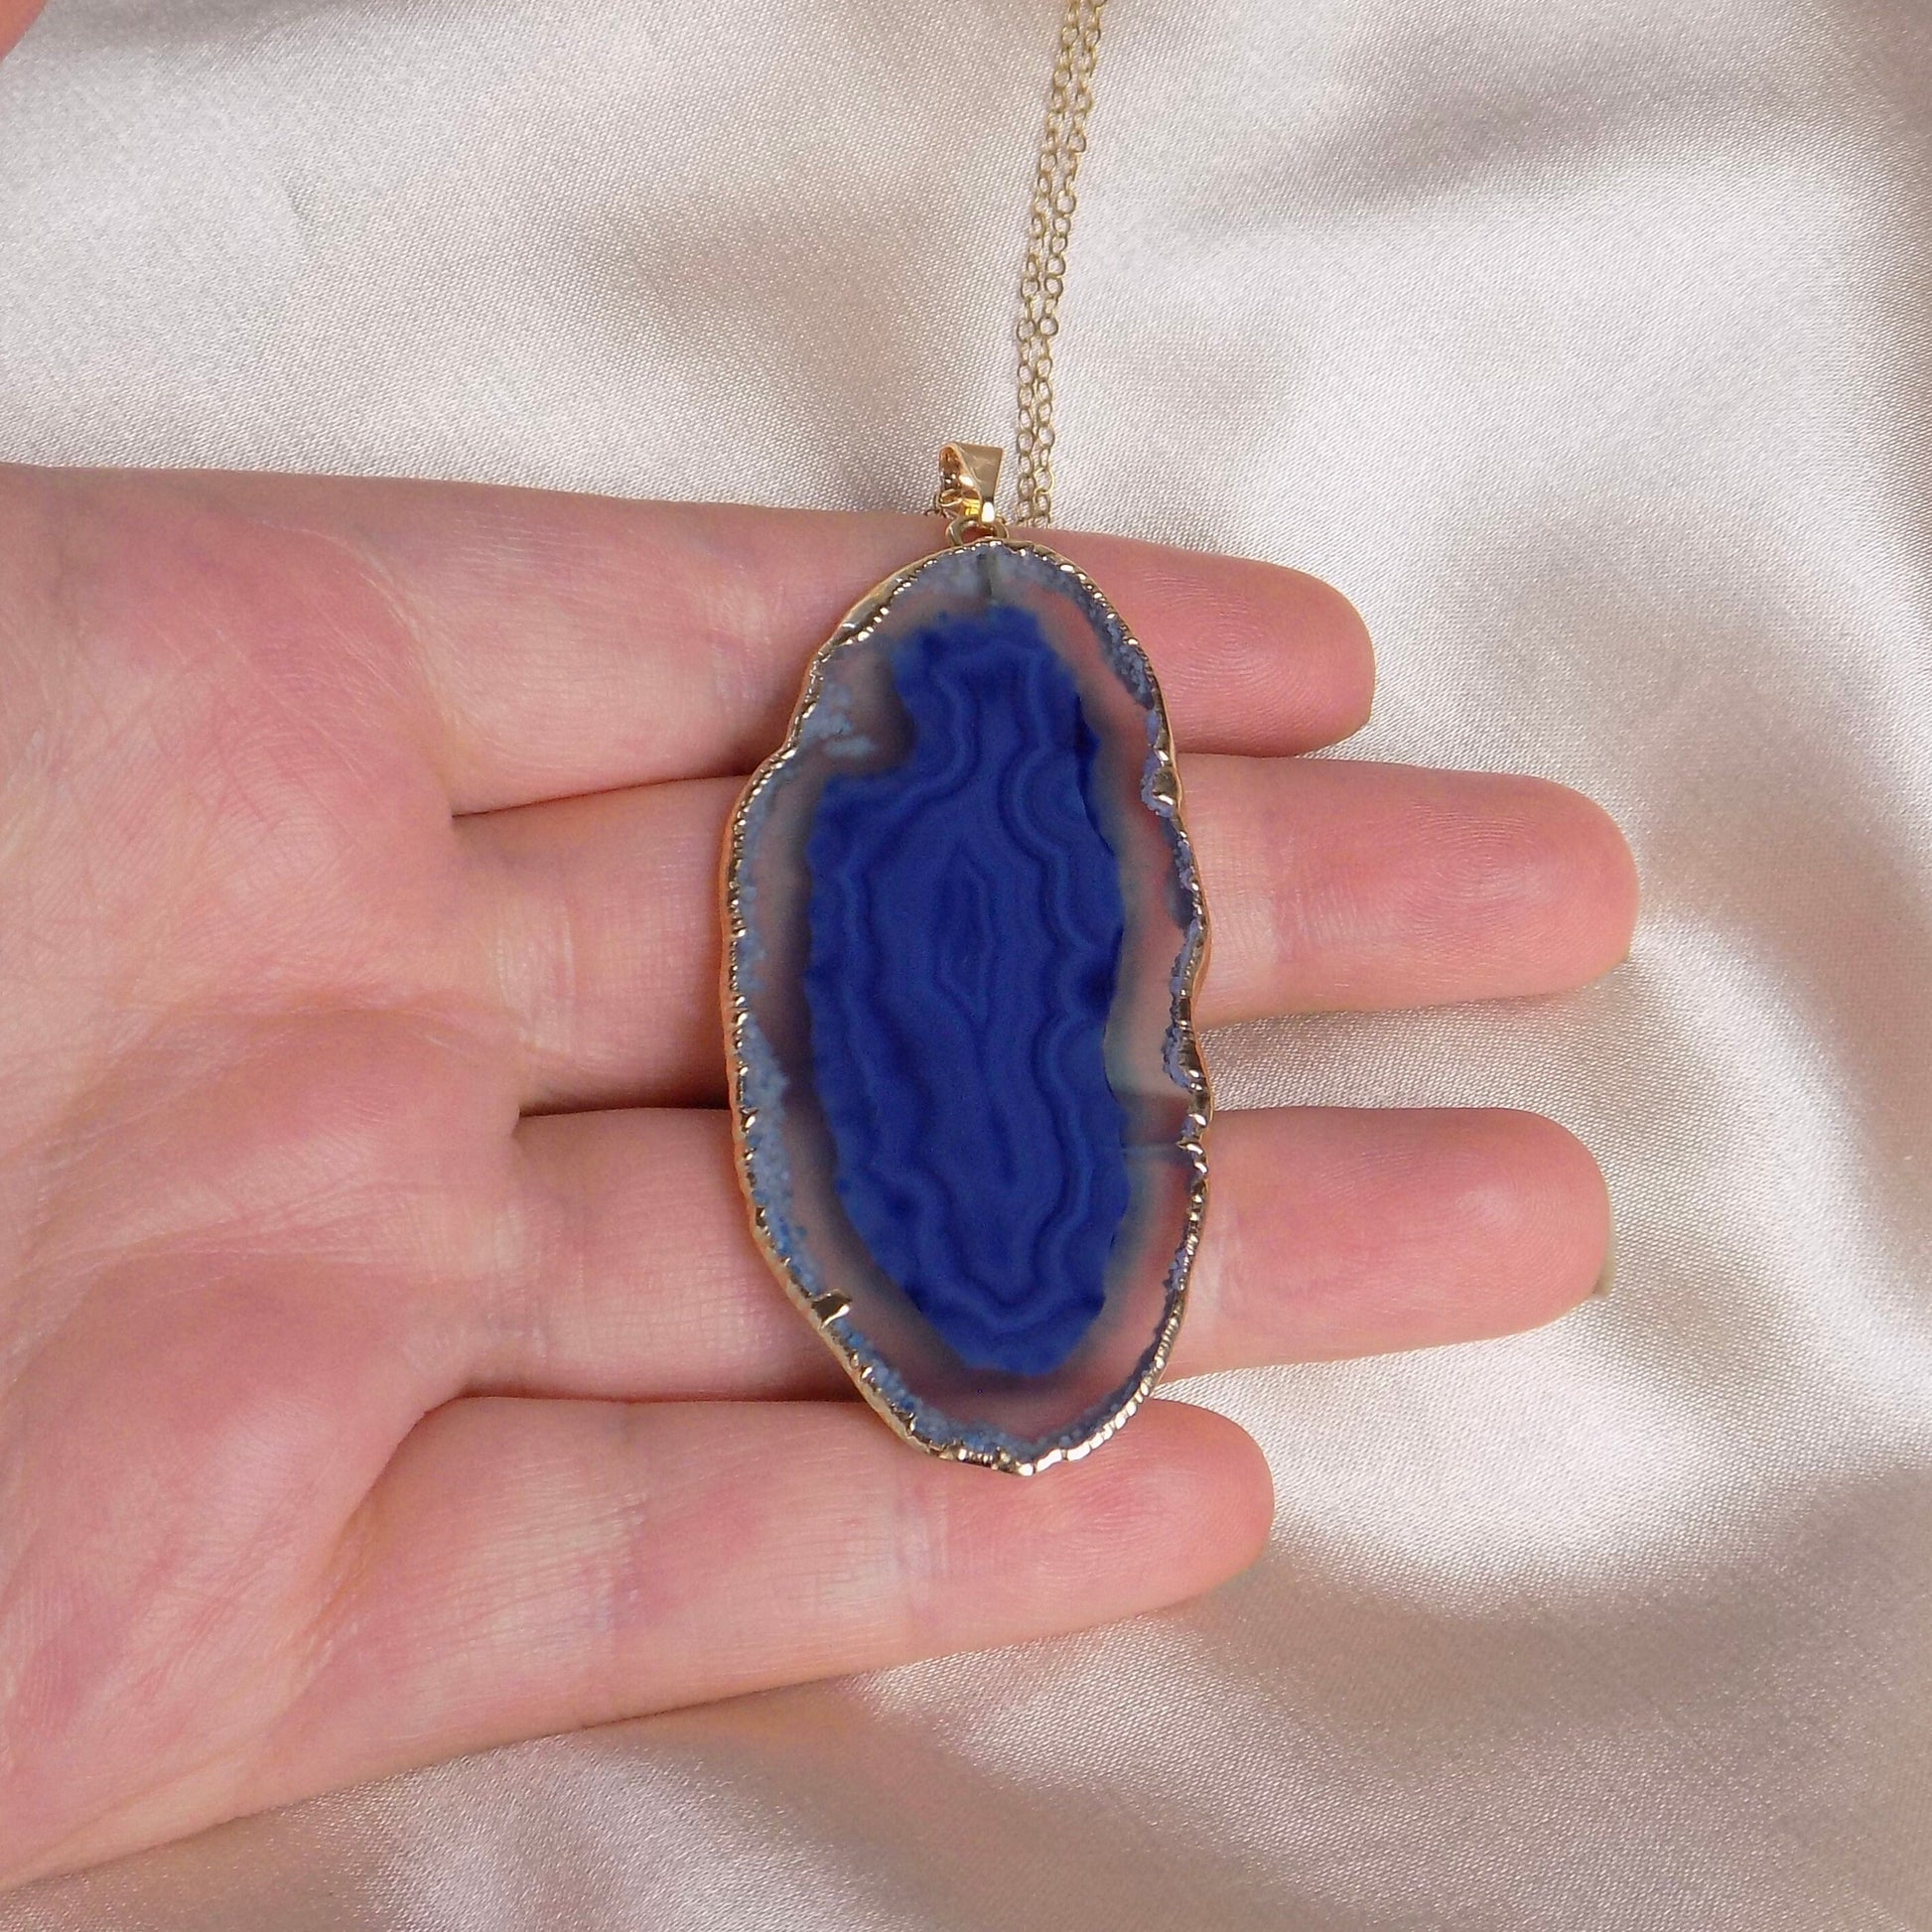 Boho Blue Agate Necklace Gold, Long Slice Geode Pendant, Statement Jewelry For Women, G15-97